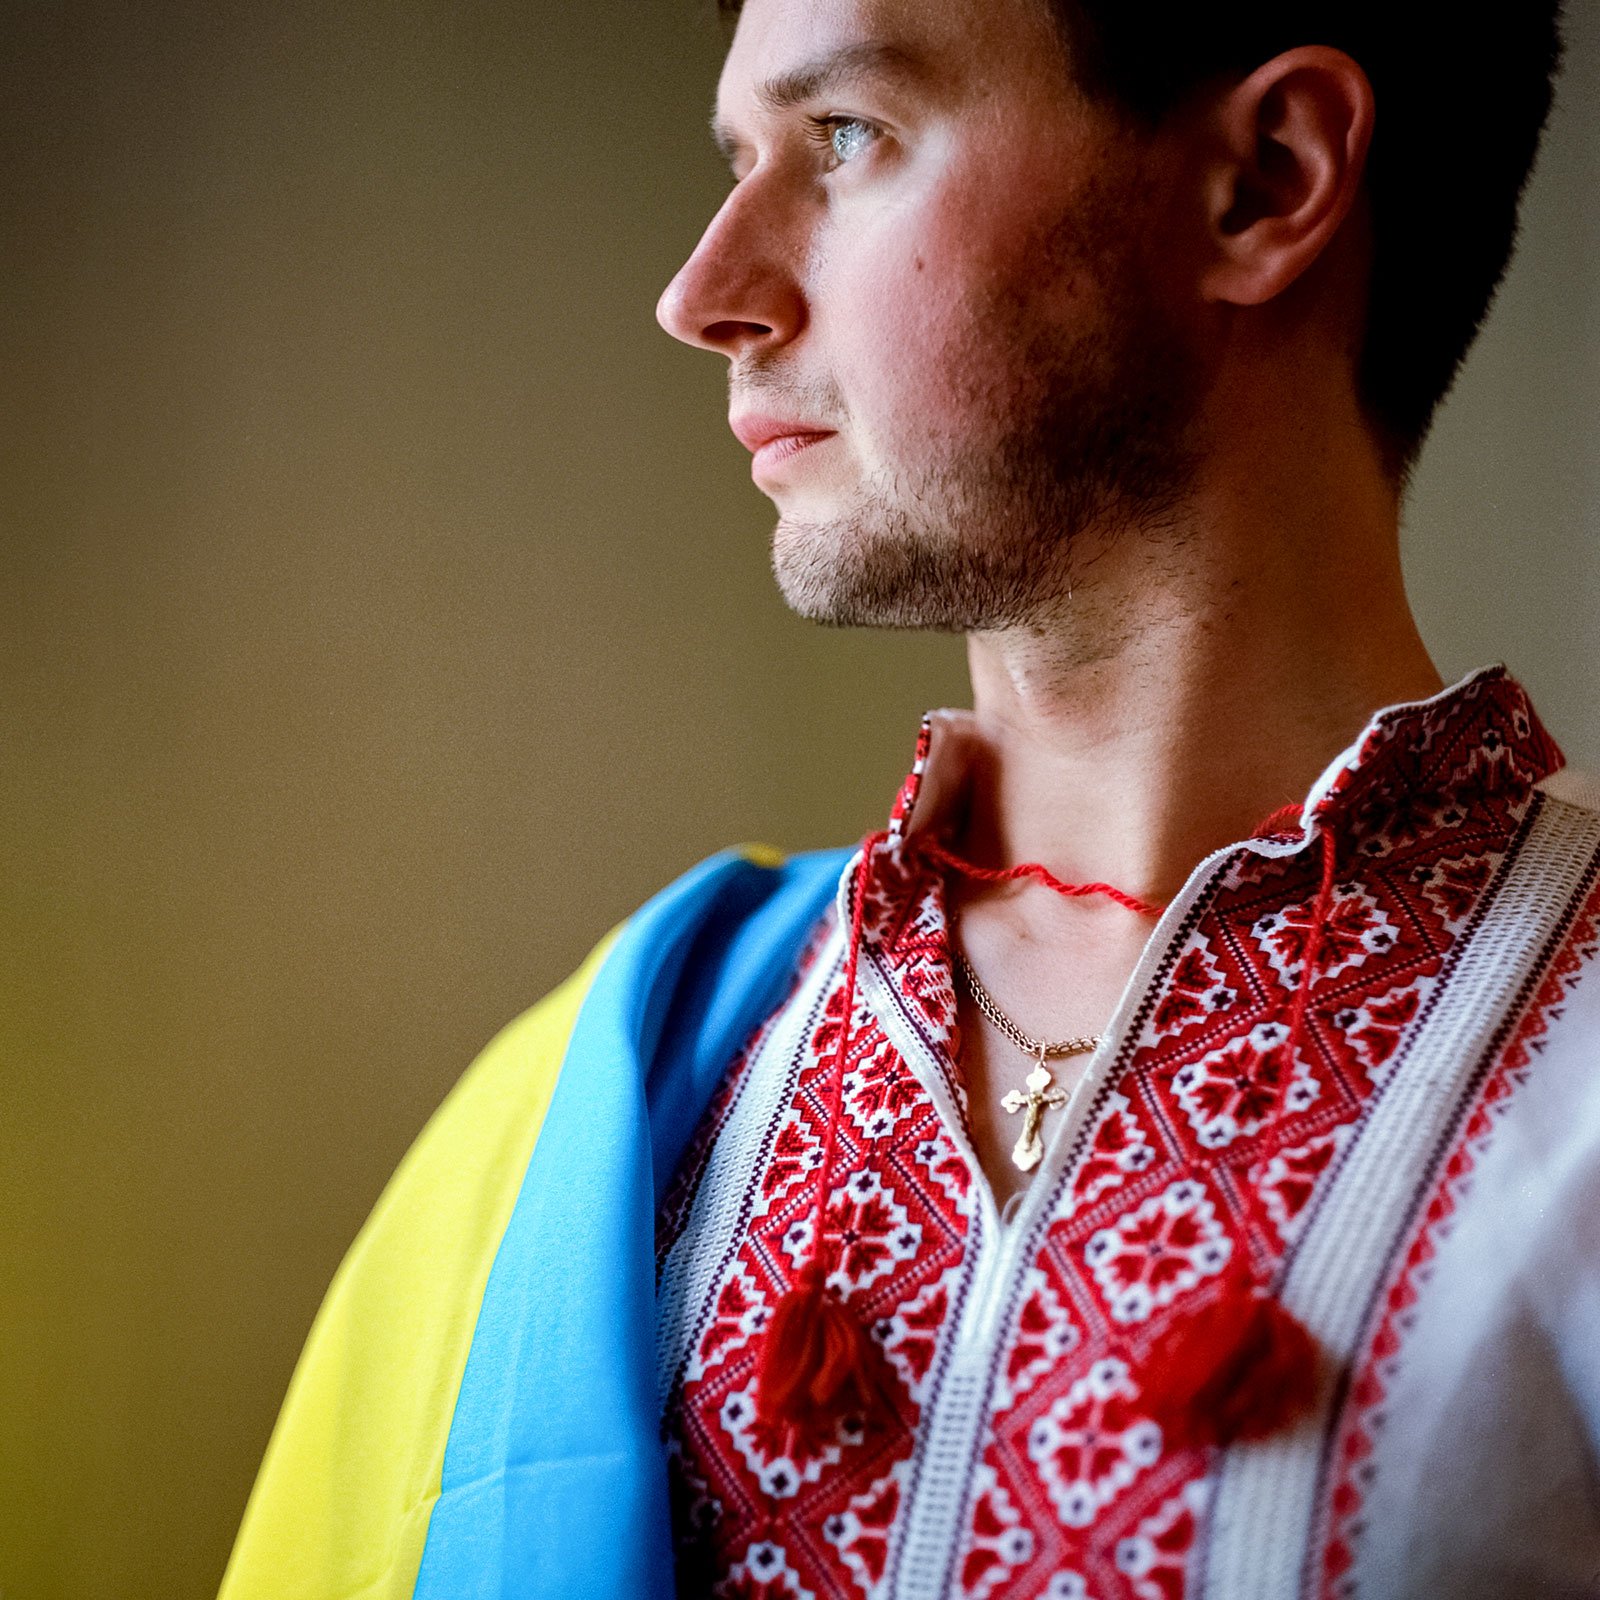 Young Ukrainian man in traditional attire